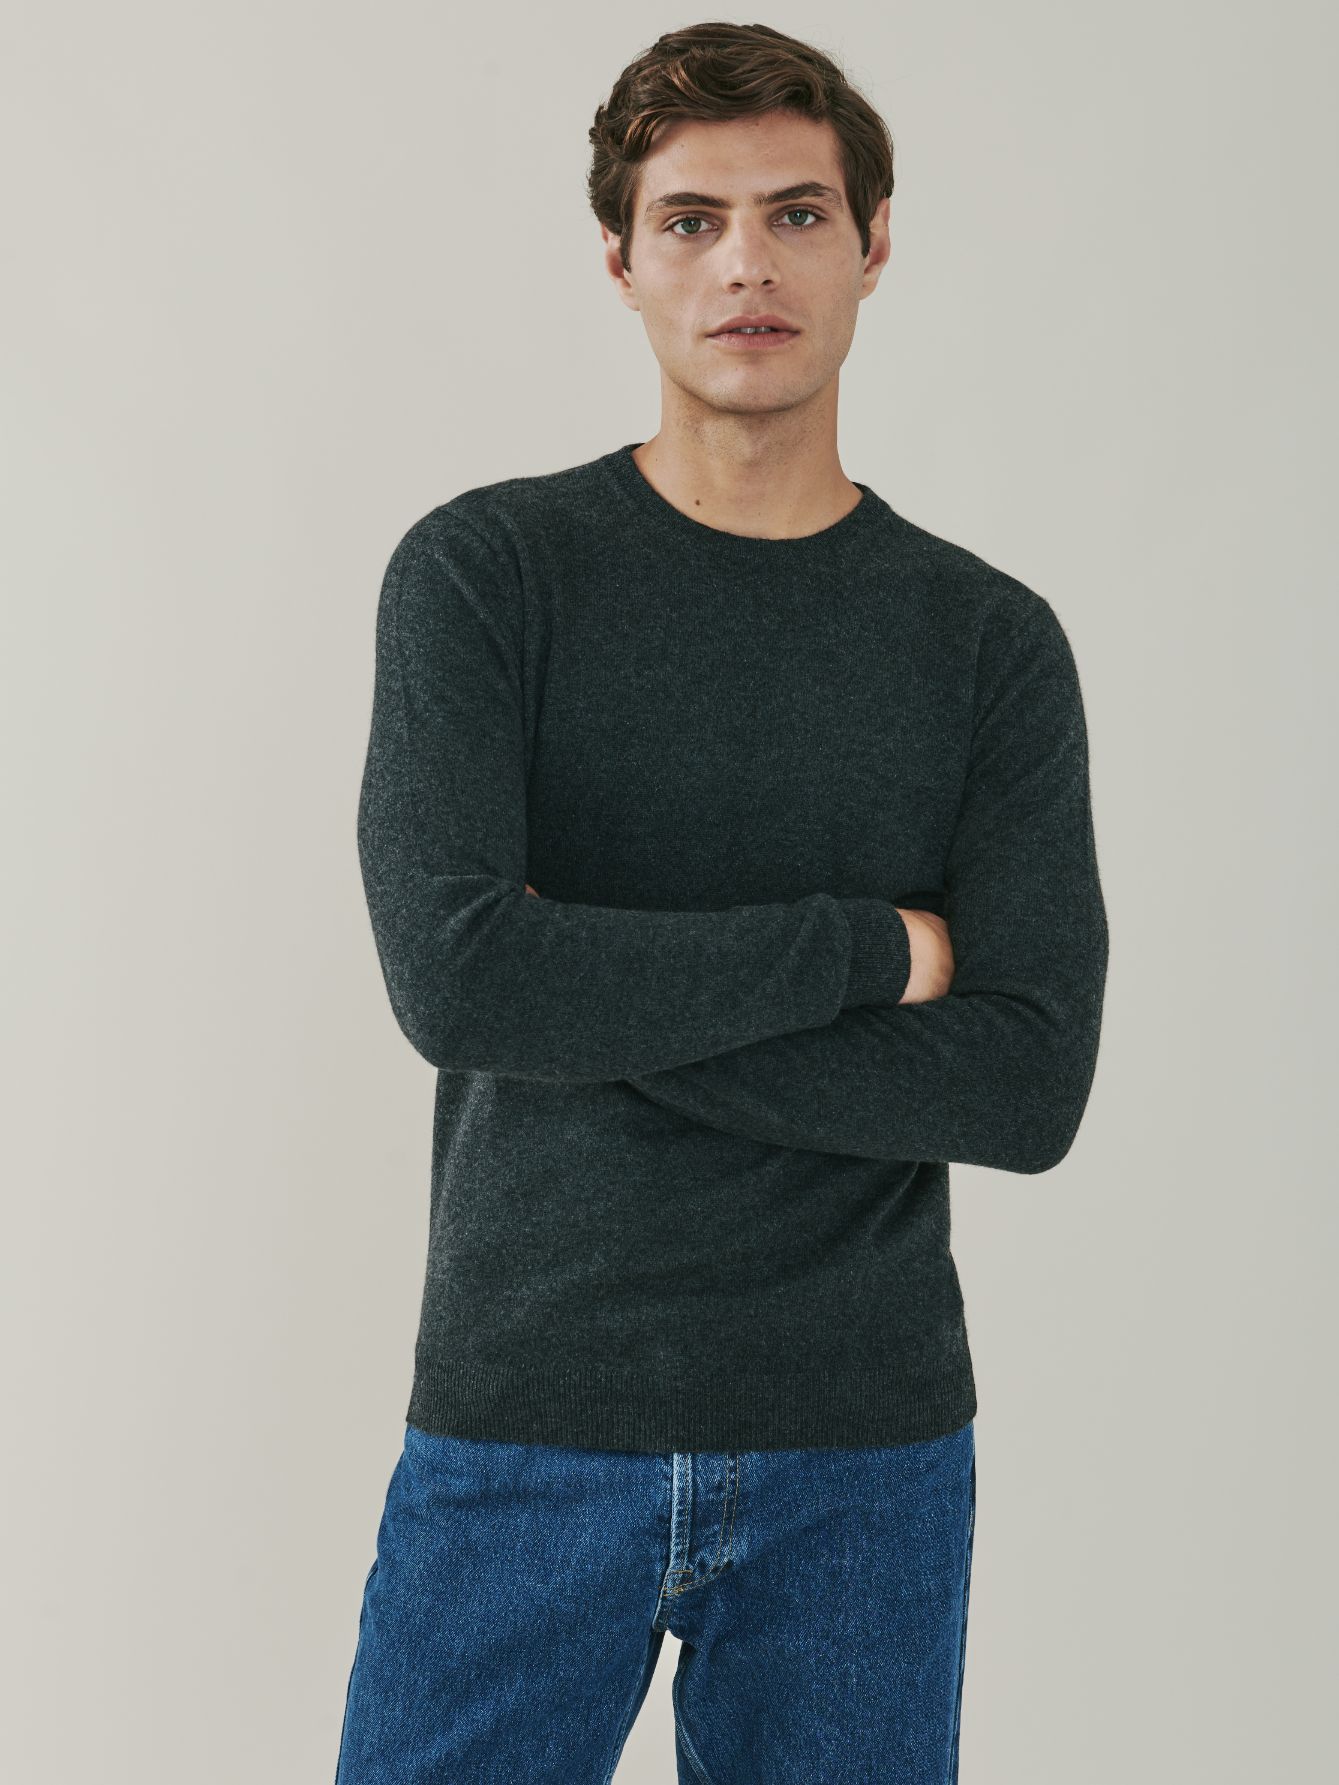 Canyon Men's Cashmere Crew Neck Sweater in Charcoal